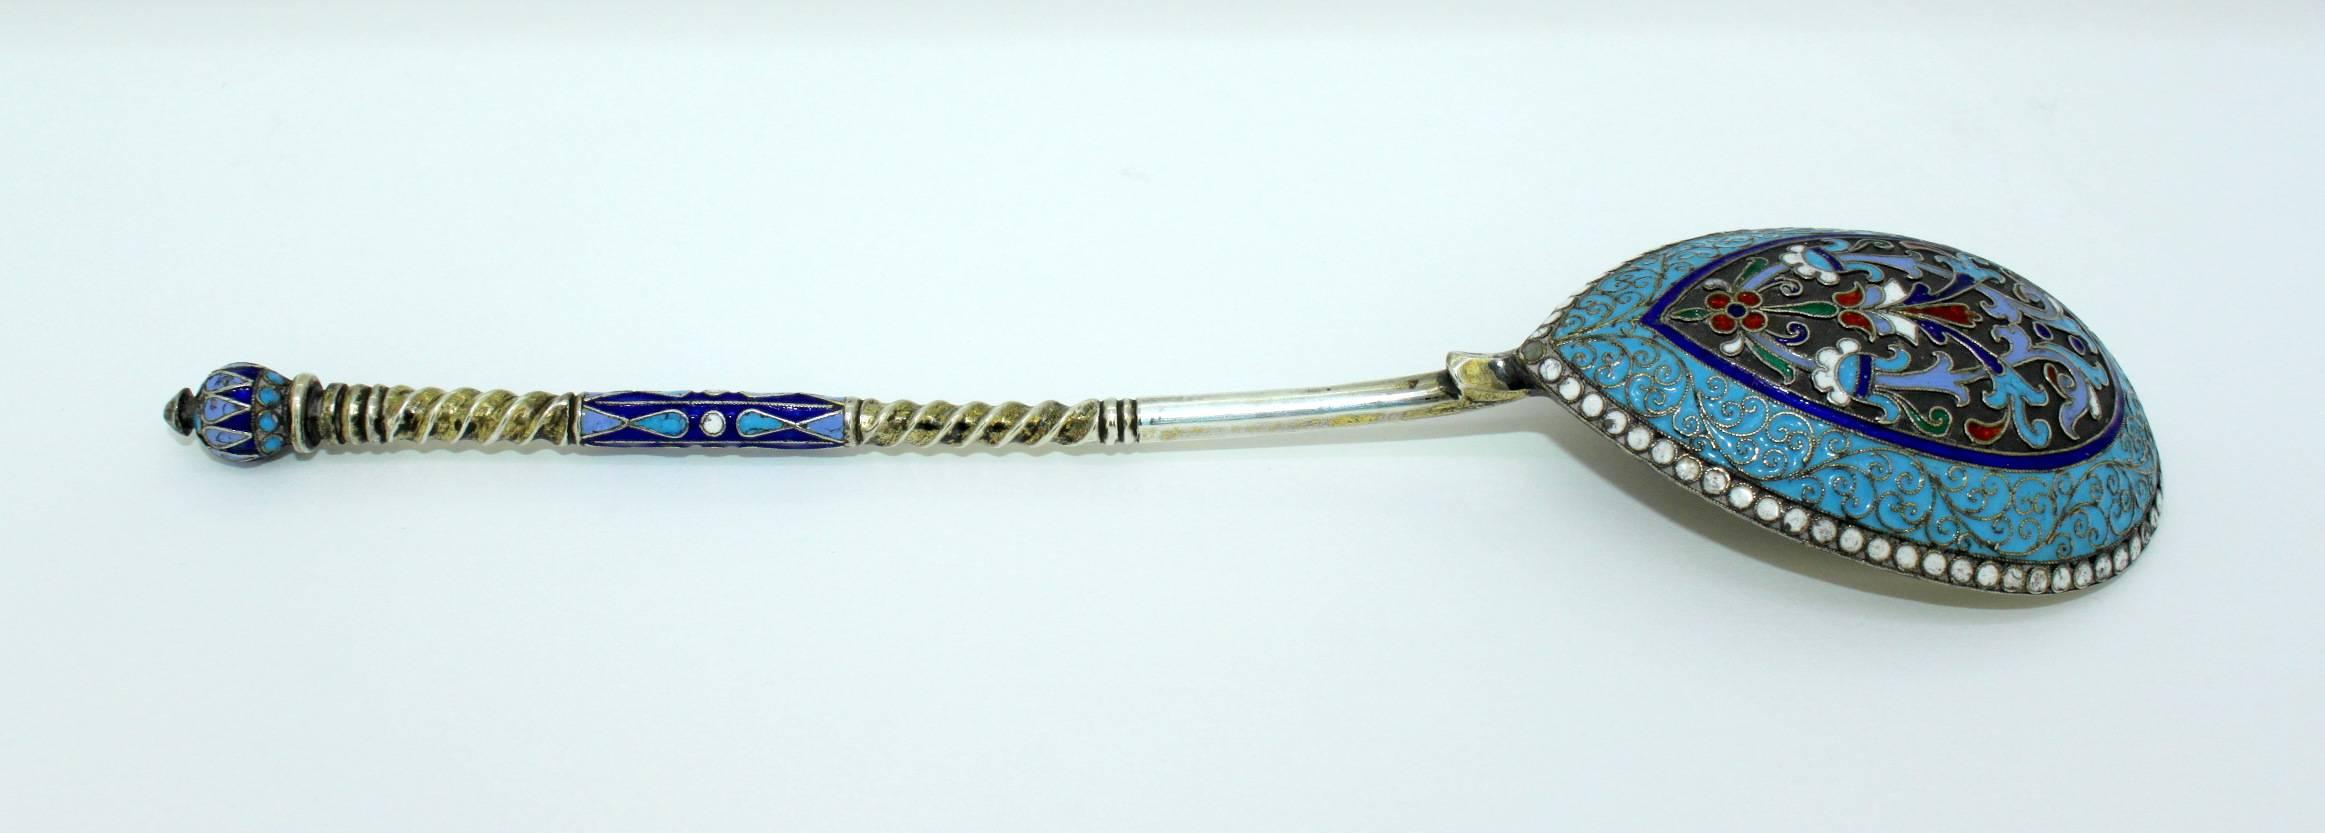 Antique Russian silver and enamel spoon
Made in Russia, Moscow, circa 1900.
Maker: Vasily Andreyev
Fully hallmarked.

Dimensions:
Size: 19.6 x 4.6 x 2.2 cm
Total weight : 57 grams total

Condition: Surface wear from general usage, the round